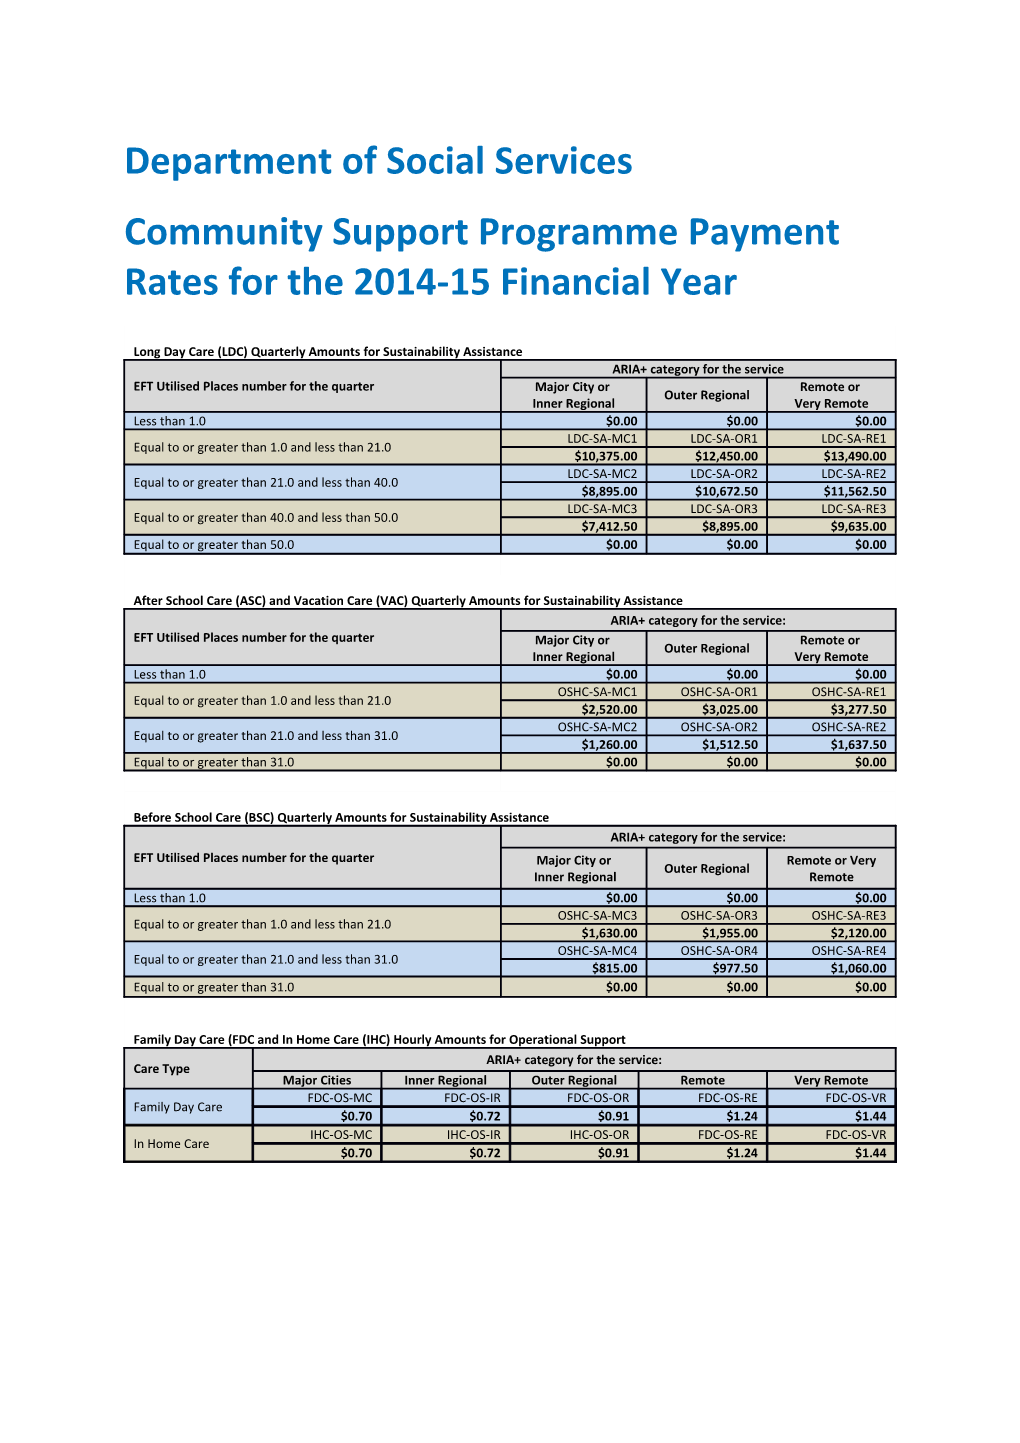 Community Support Programme Payment Rates for the 2014-15 Financial Year